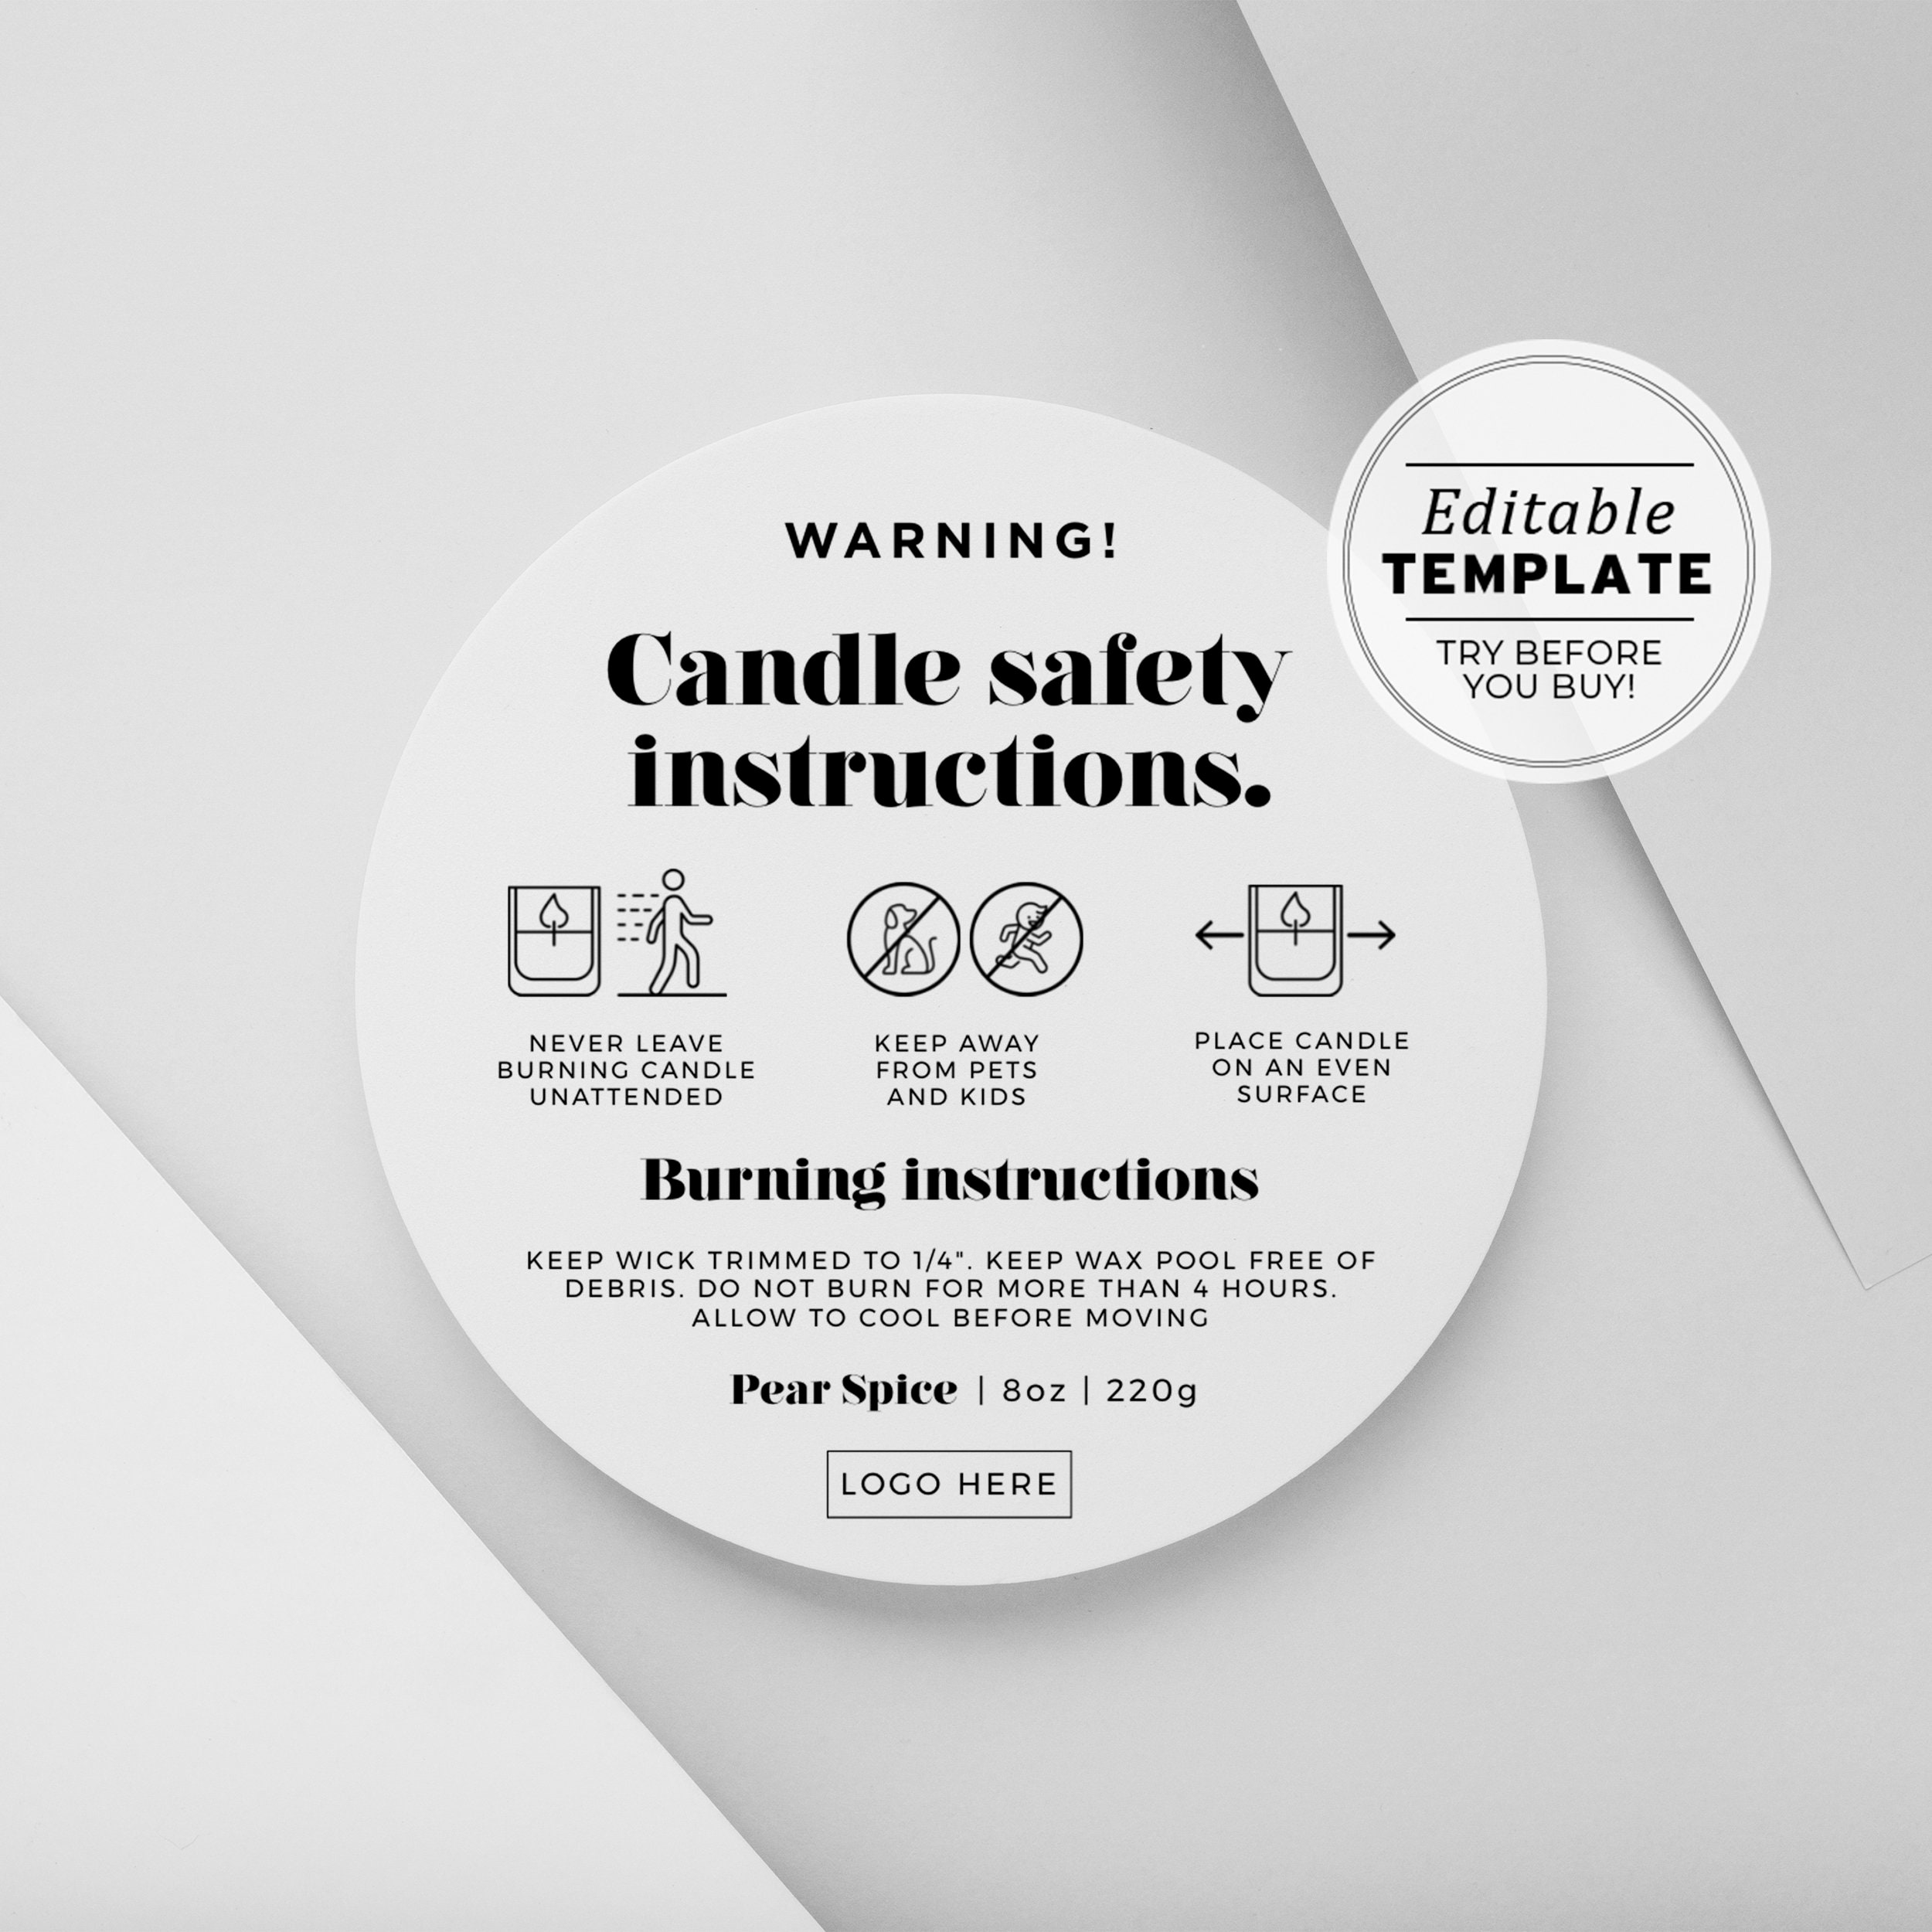 Minimalist Candle Warning Label Template, Printable Candle Safety Sticker,  Sizes: 1.5in / 2in / 3in EDITABLE TEMPLATE 055 043 Mr White 